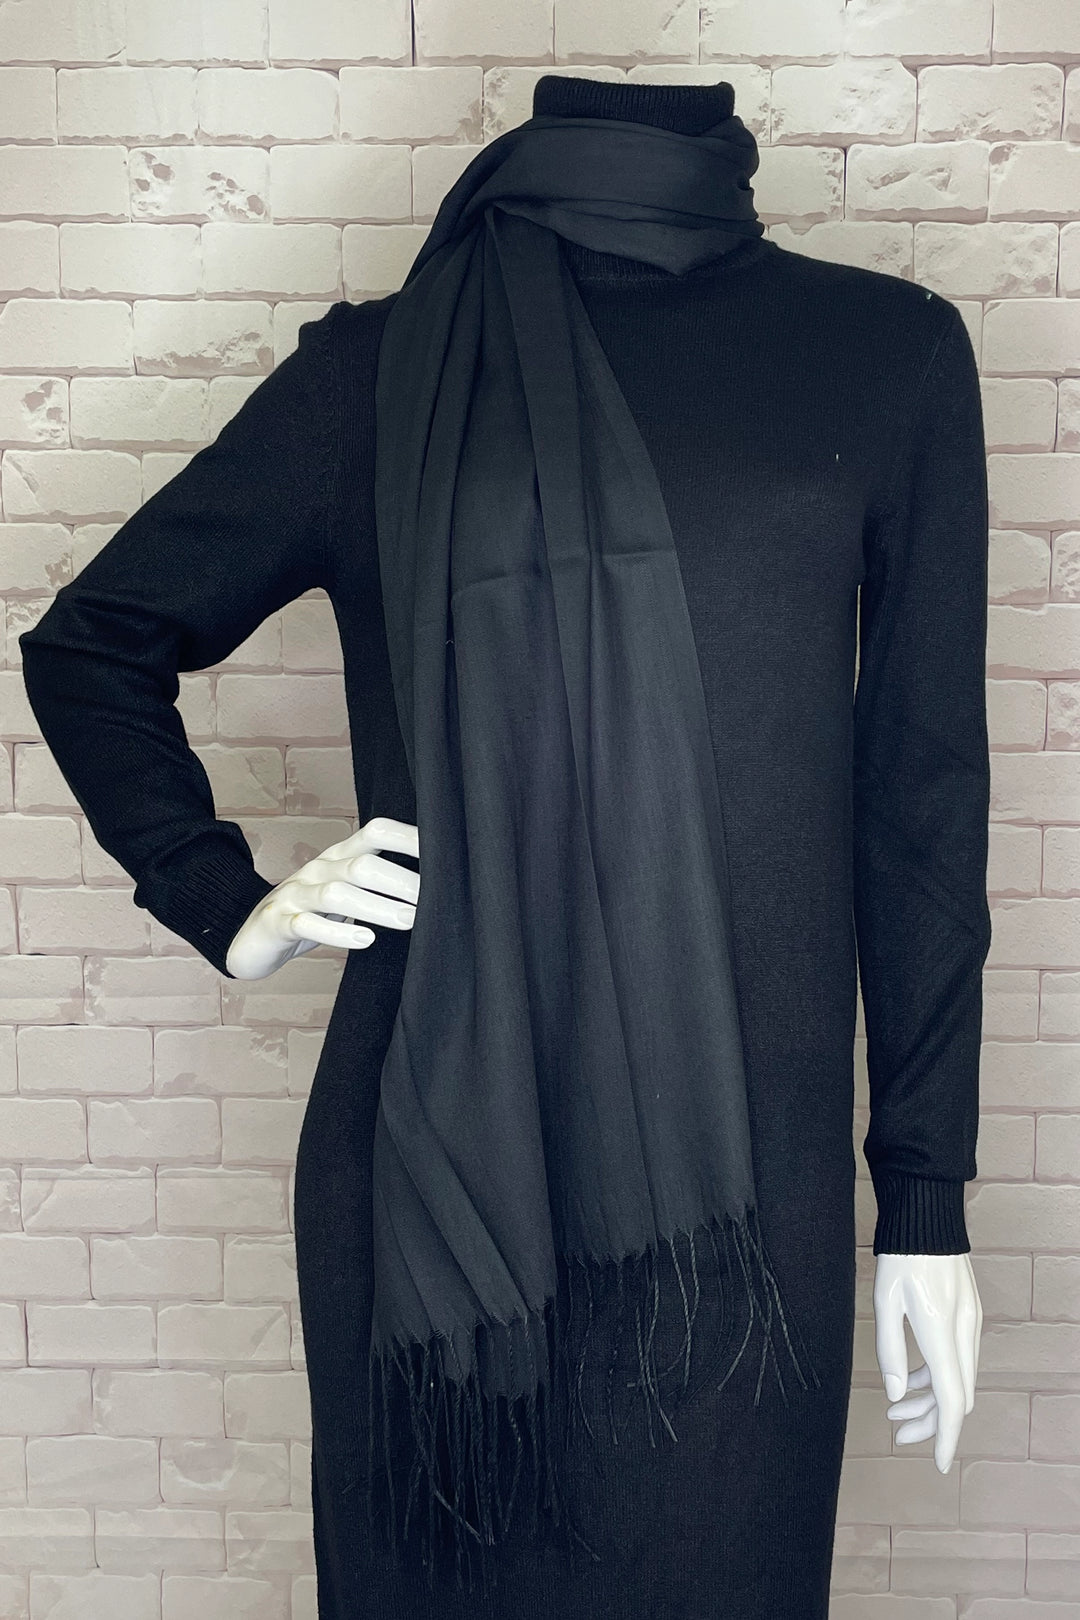 Its whisper-light blend of cotton, viscose, and cashmere is crafted to feel sublimely soft against the skin, while evoking a feeling of elegant sophistication. 